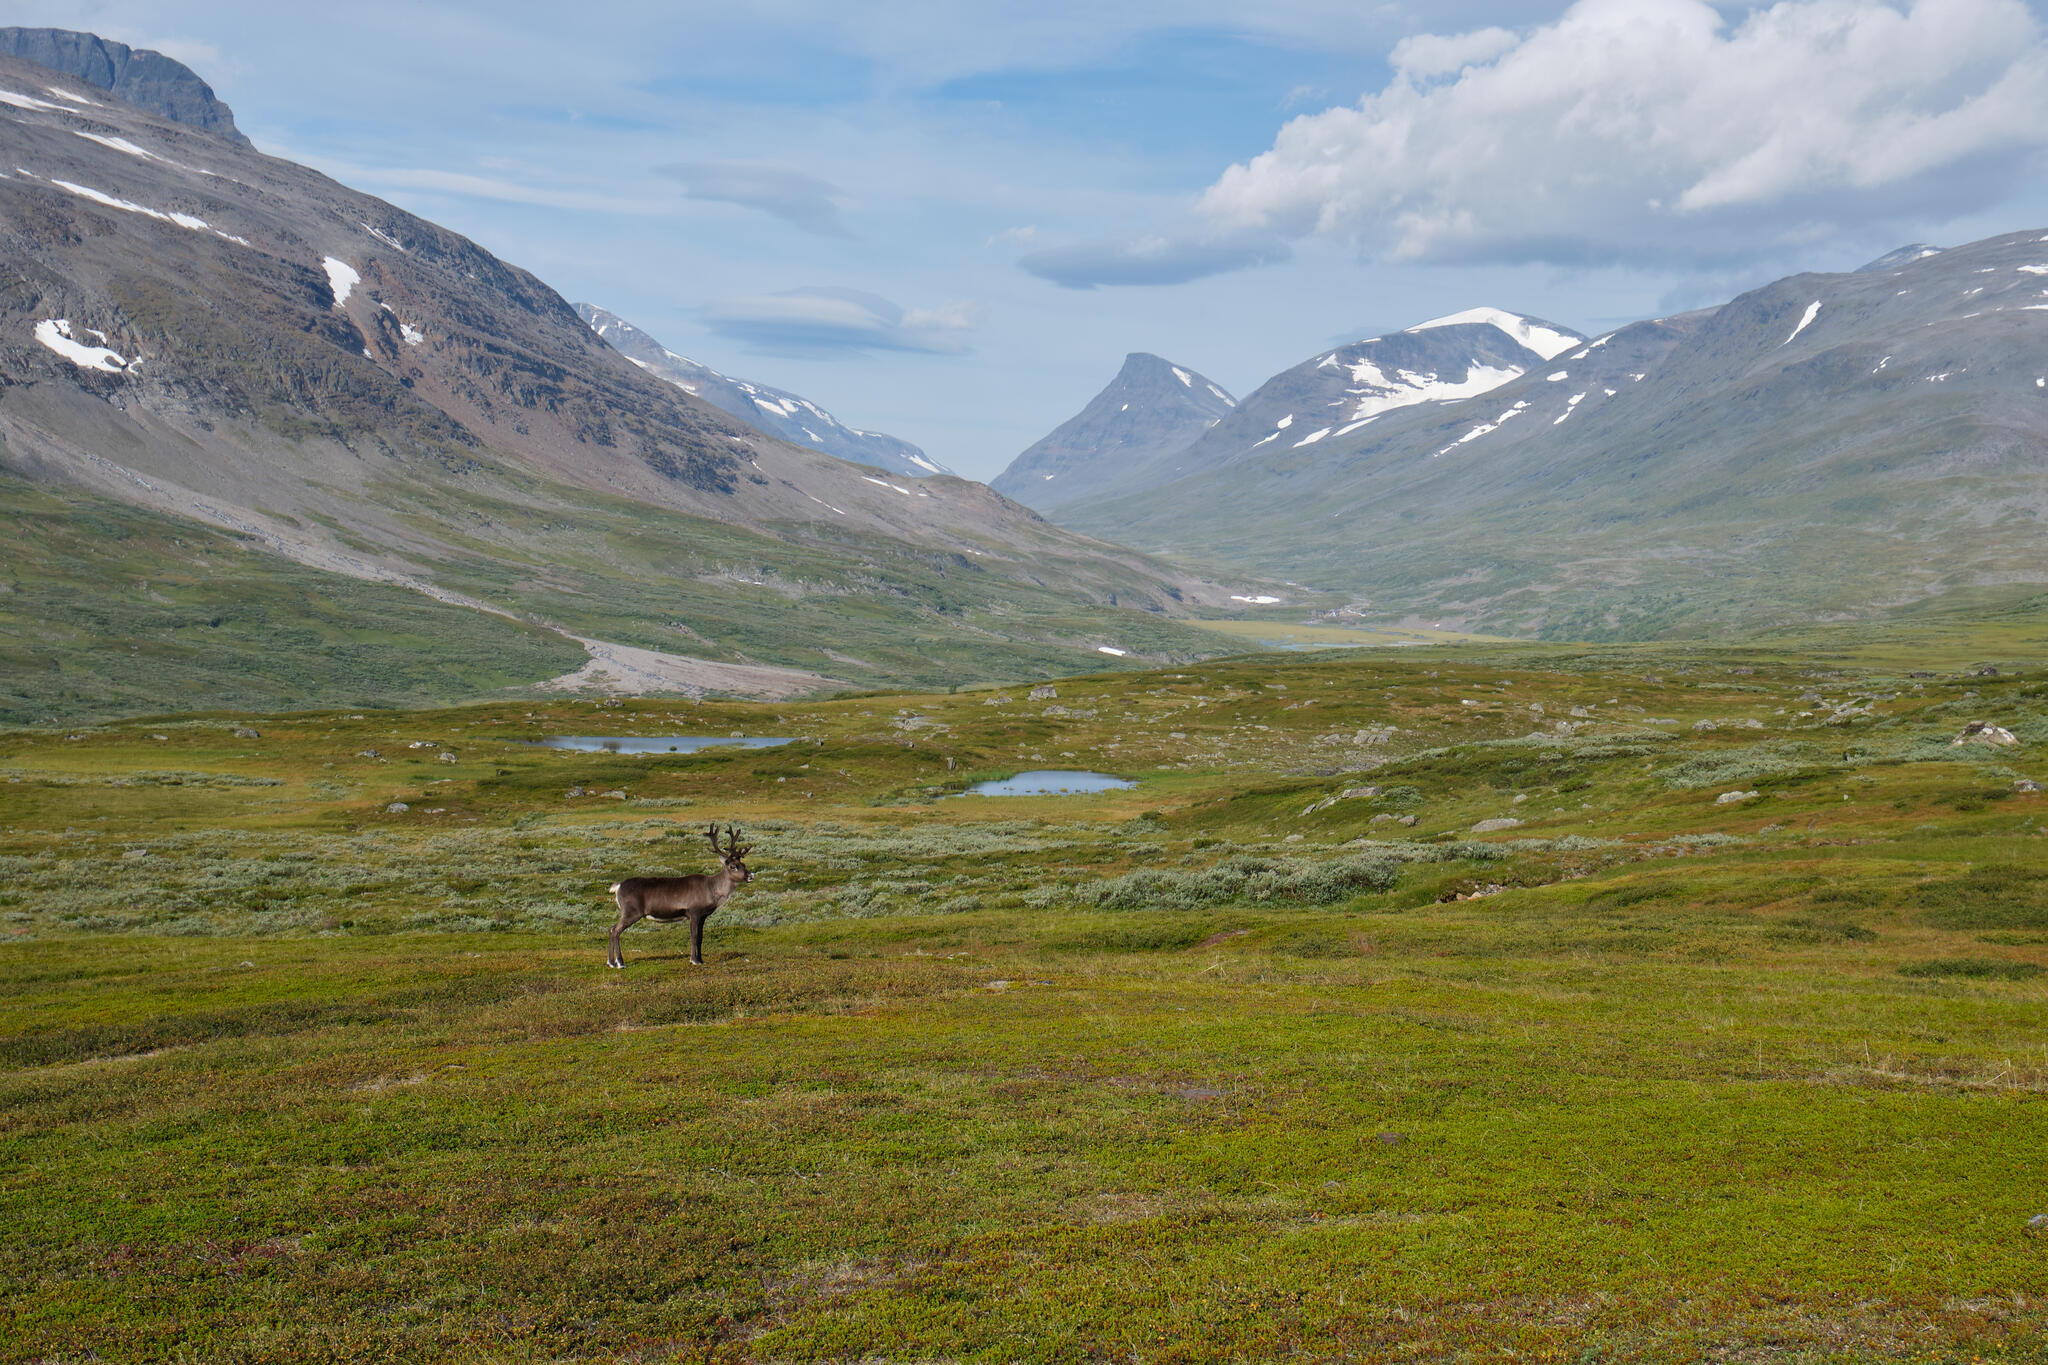 A reindeer near Tjaggnarisjahka with Guohpervagge in the background.